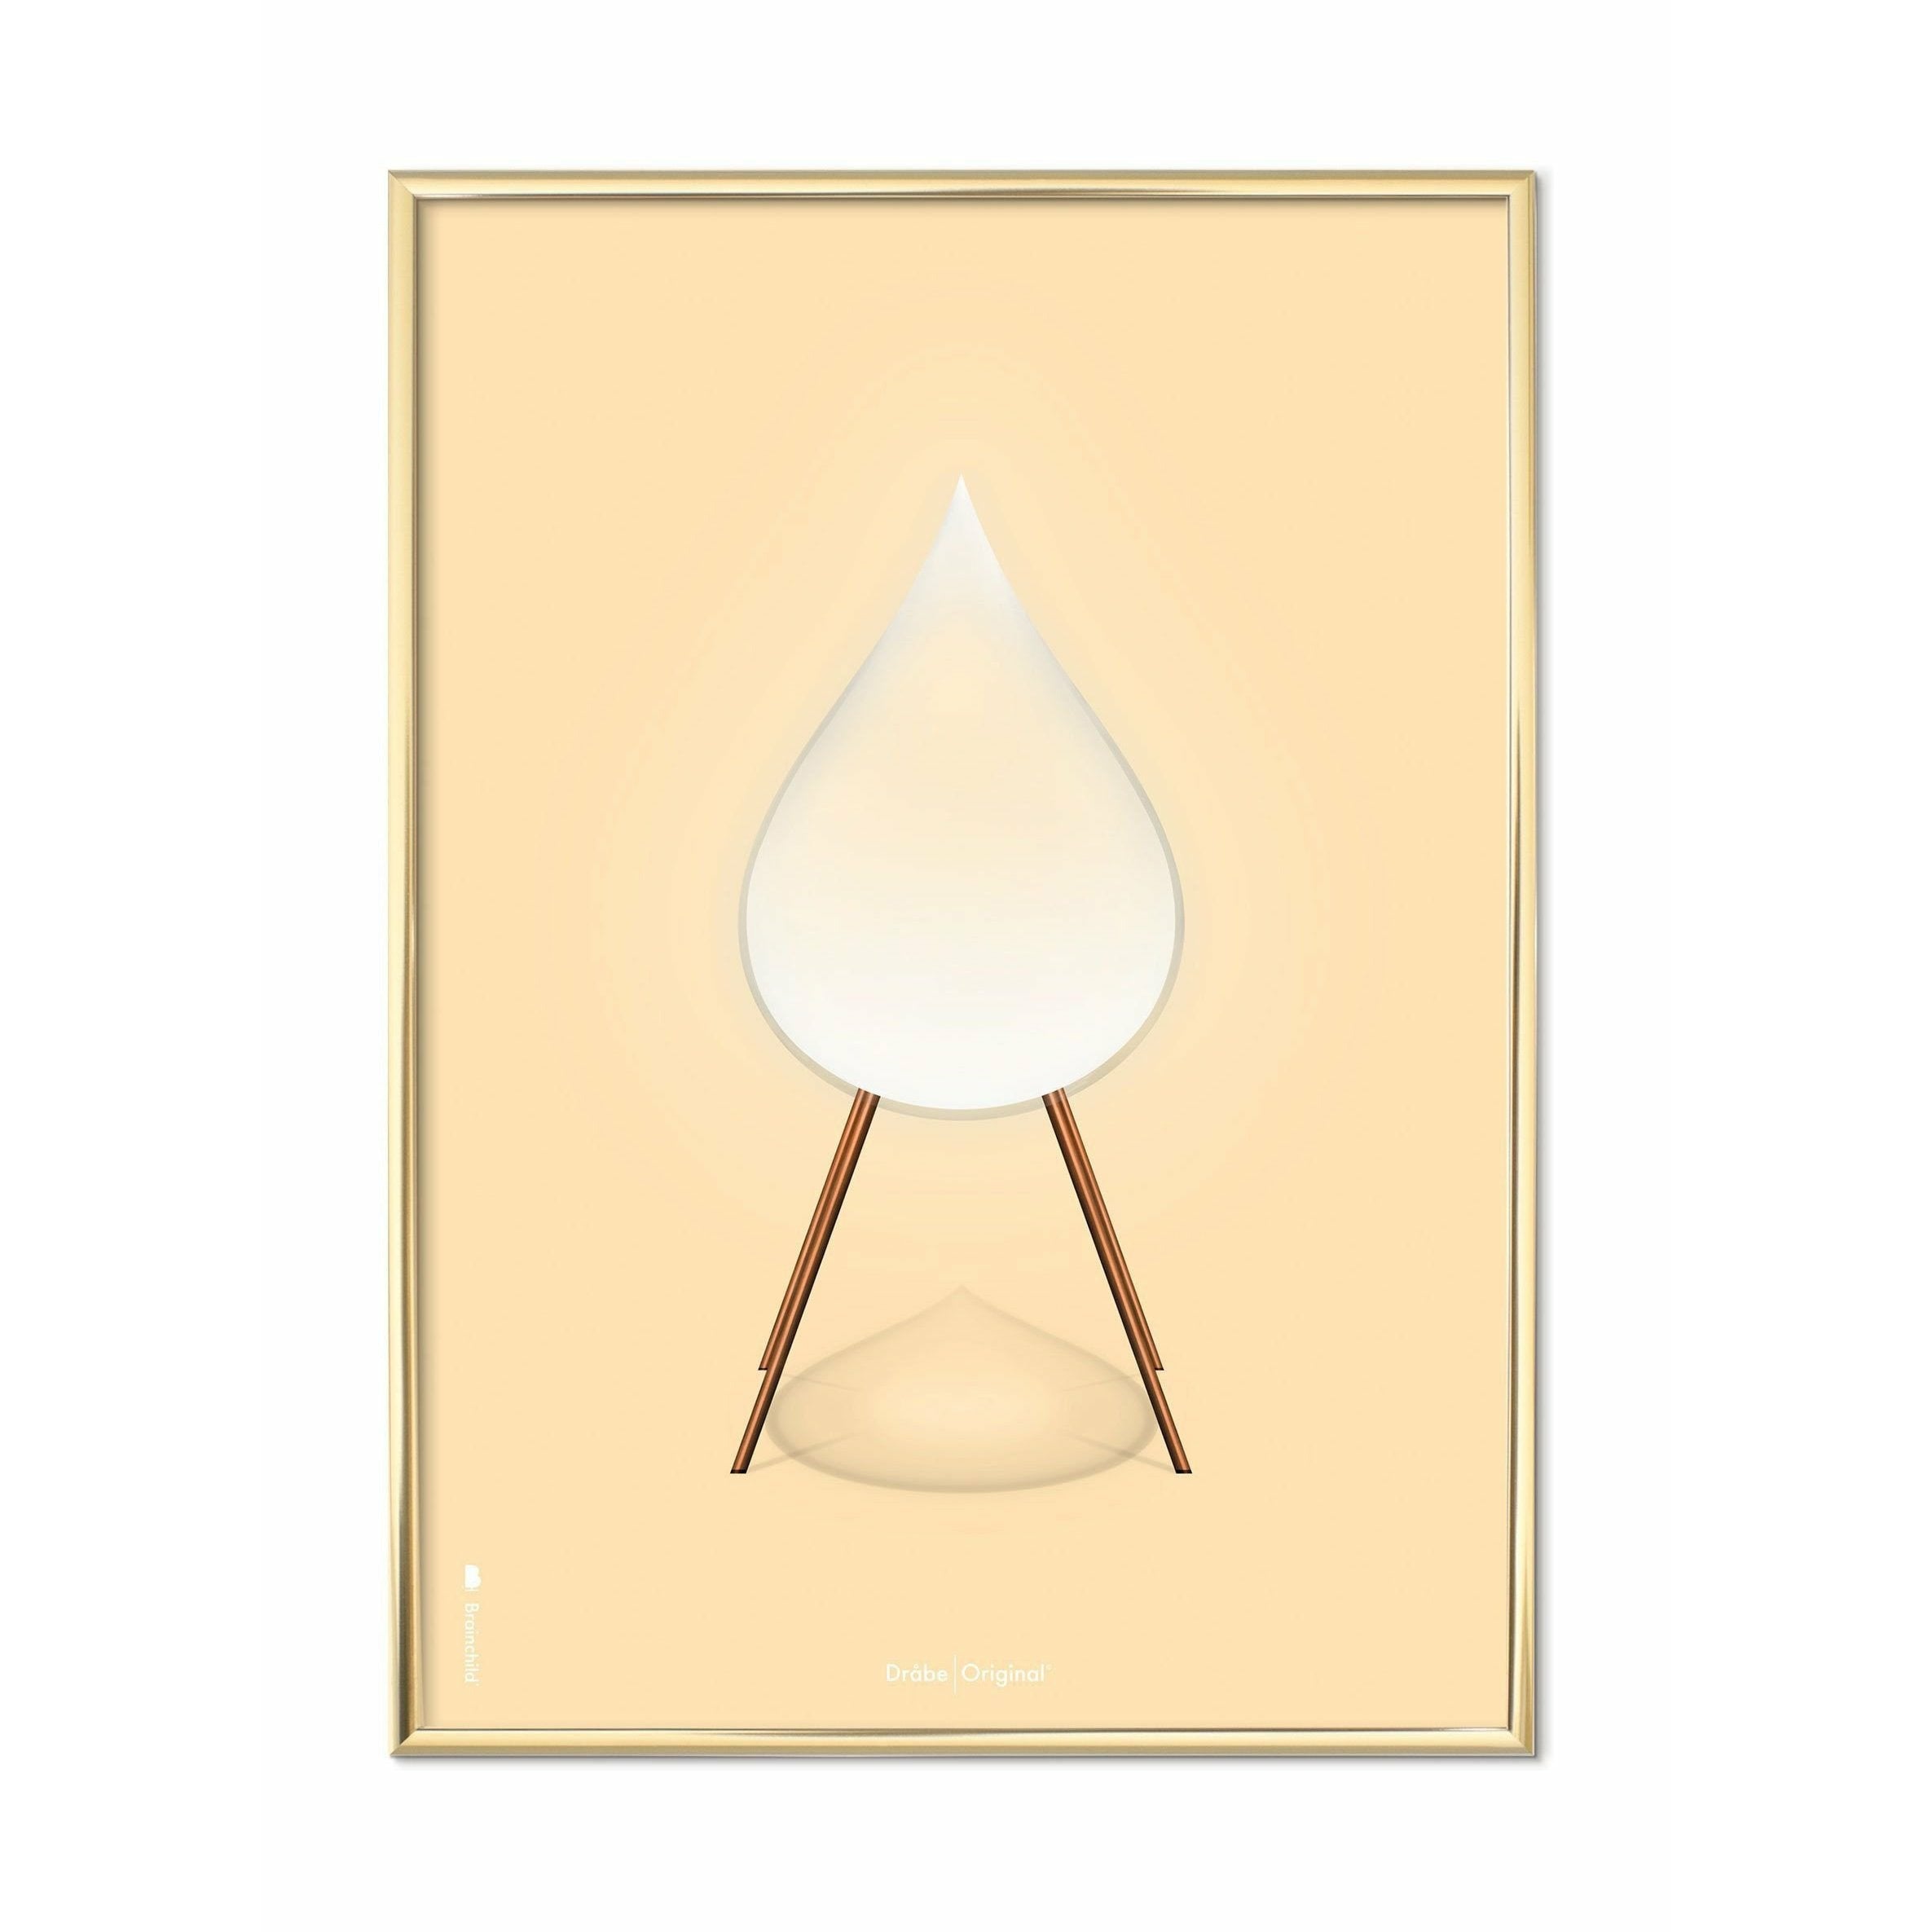 Brainchild Drop Classic Poster, Brass Colored Frame A5, Sand Colored Background